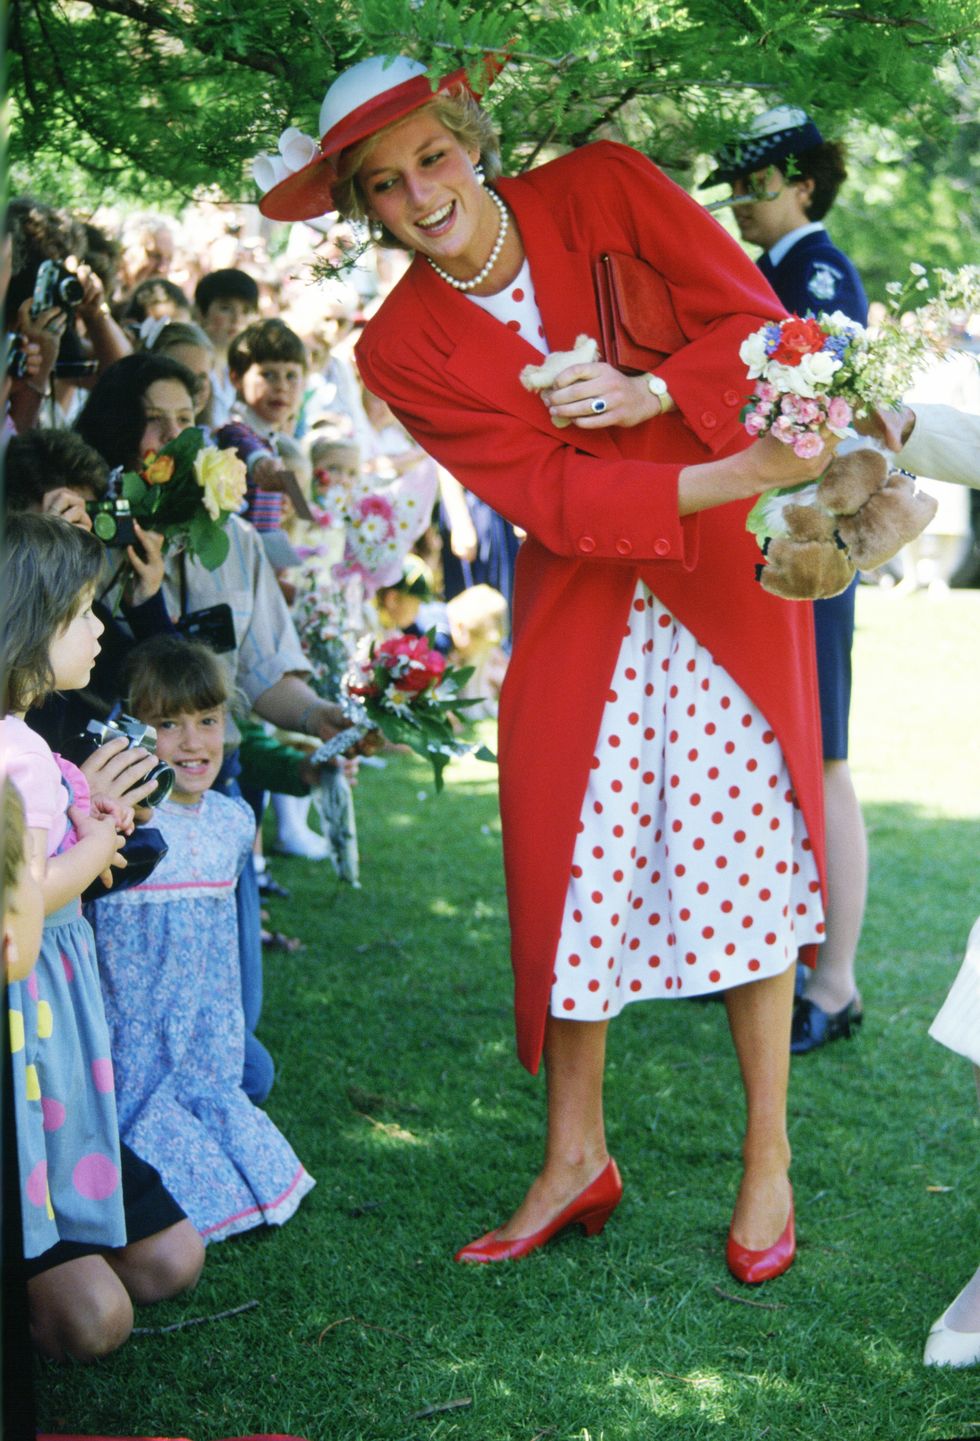 Diana, Princess of Wales hands the flowers she receives from